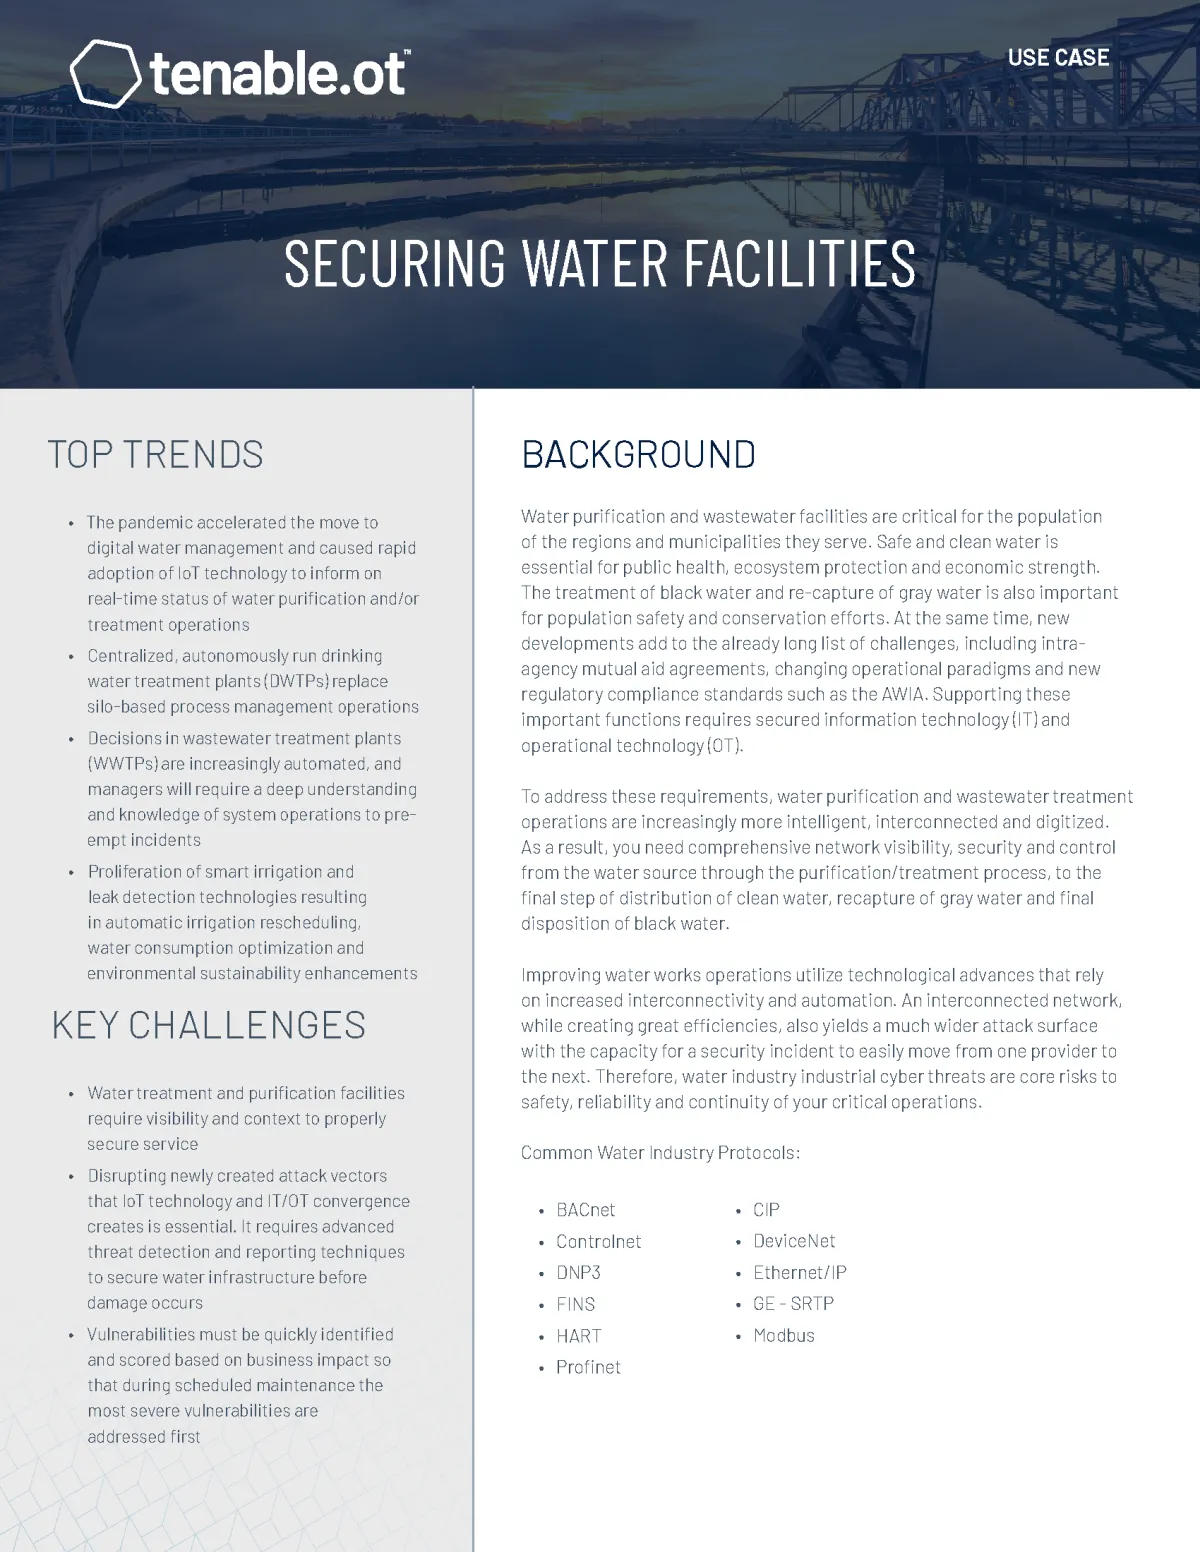 Use Case: Tenable.ot - Securing Water Facilities